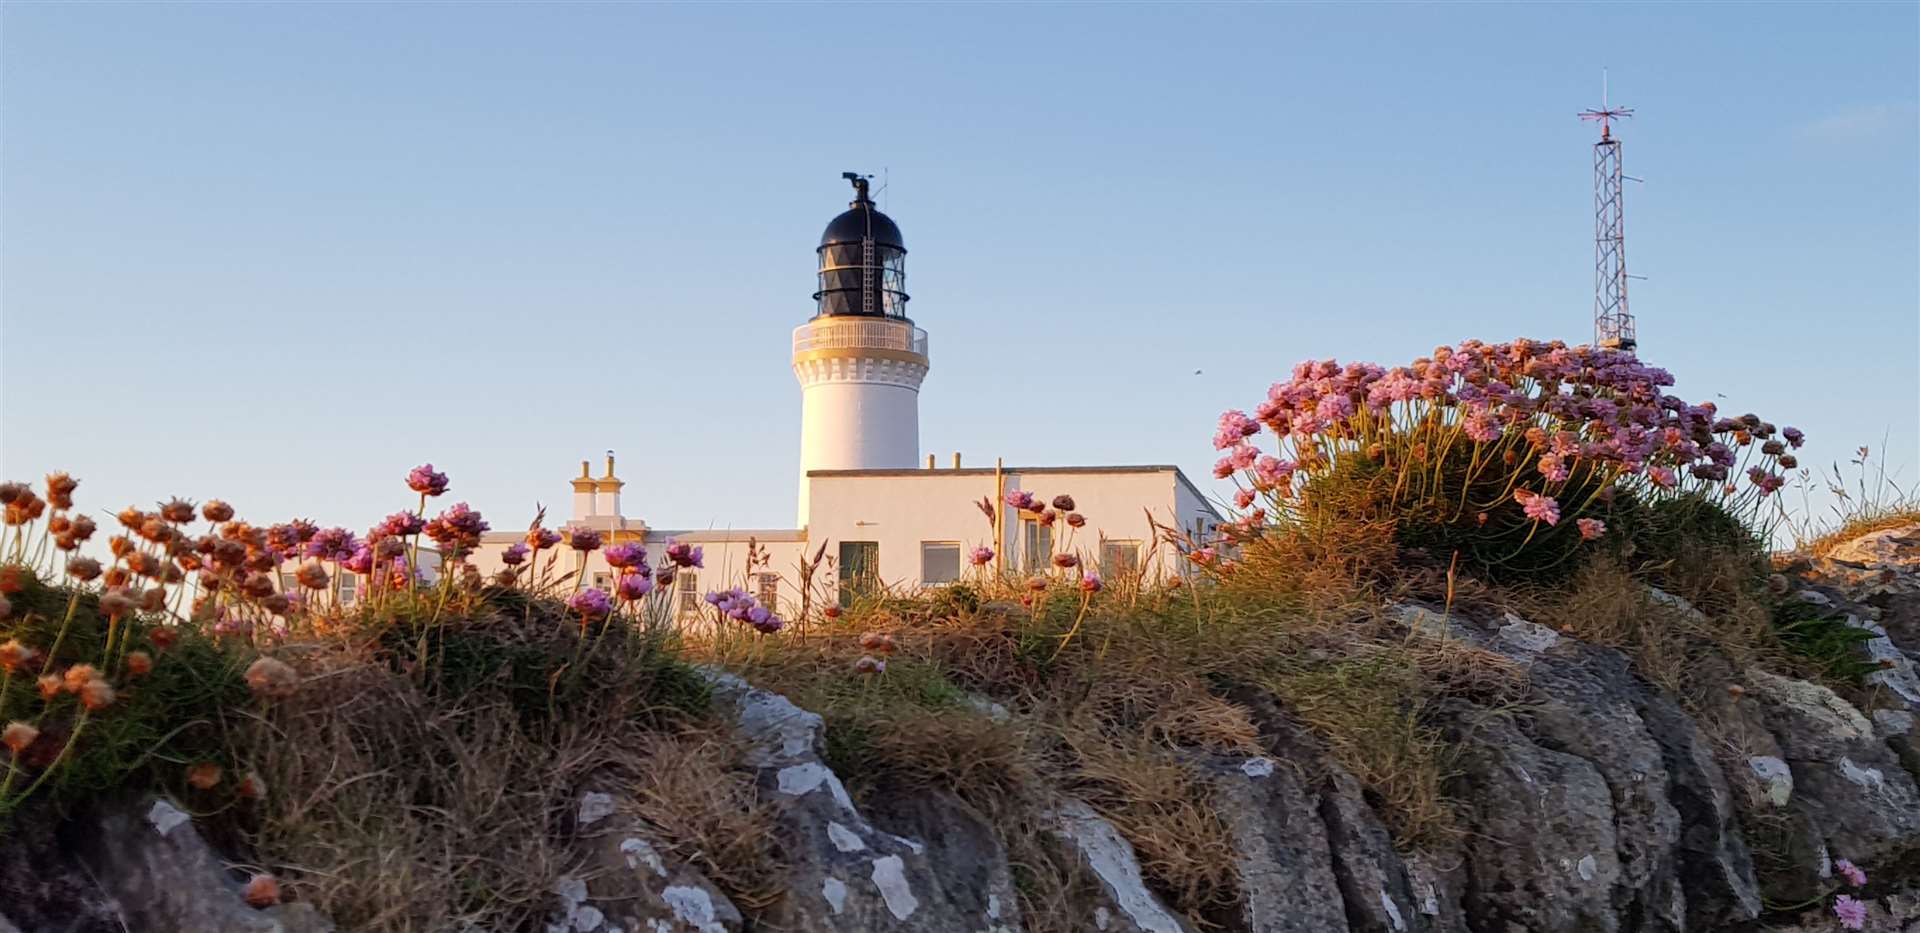 Noss Head lighthosue offers a special getaway for visitors.